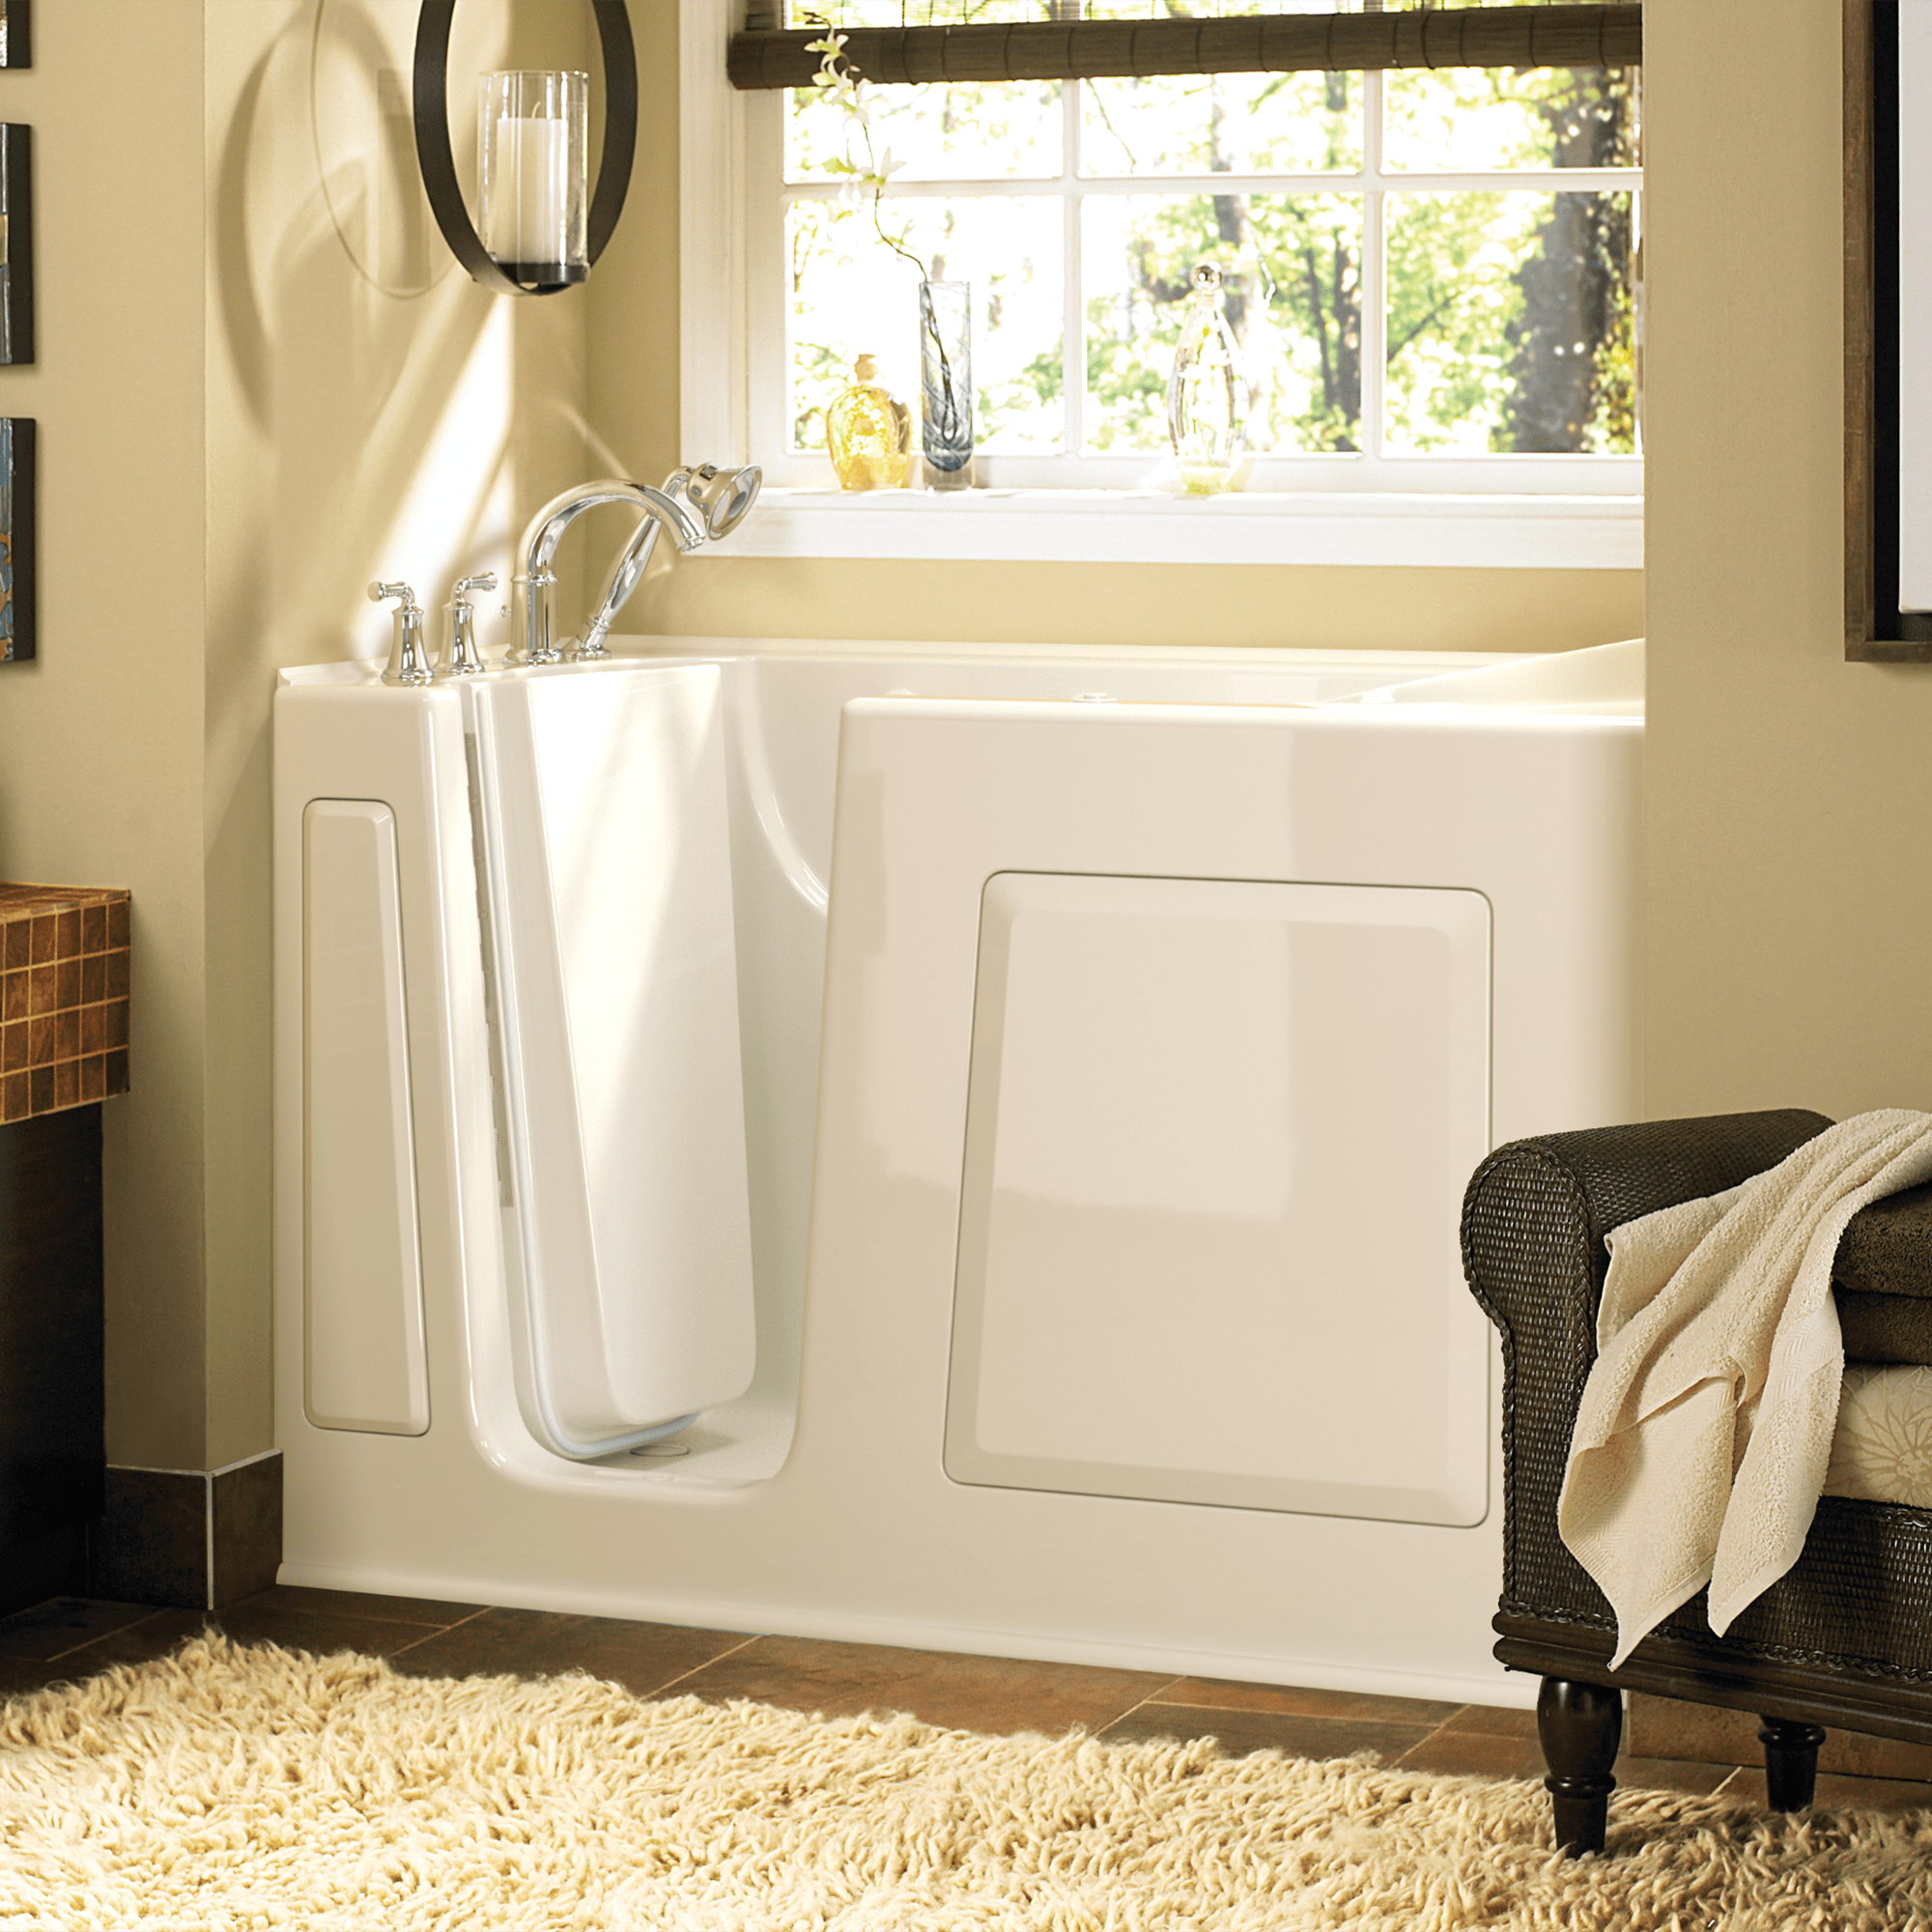 Gelcoat Value Series 30 x 60 -Inch Walk-in Tub With Air Spa System - Left-Hand Drain With Faucet